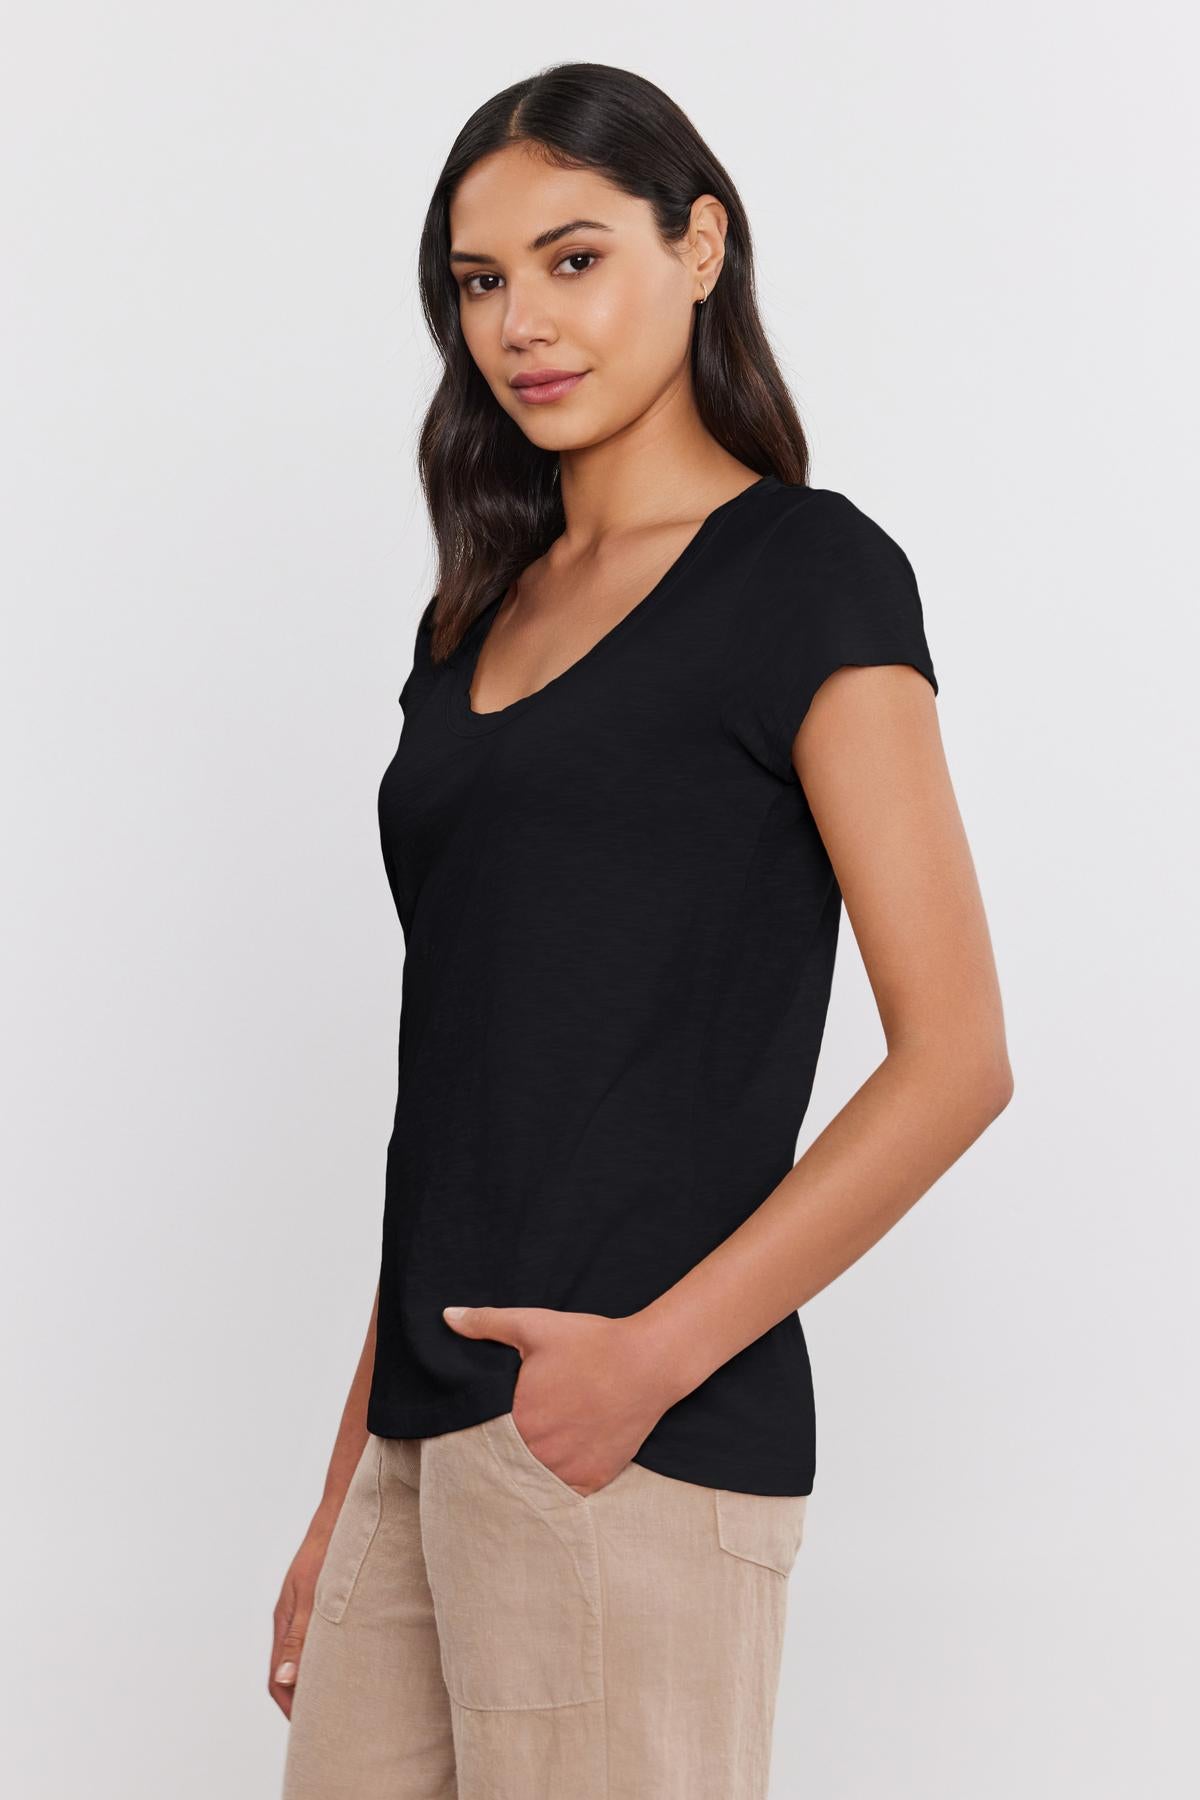 A woman in a black KIRA ORIGINAL SLUB SCOOP NECK TEE from Velvet by Graham & Spencer and beige pants, standing with her hand in her pocket, looking at the camera.-36444760539329